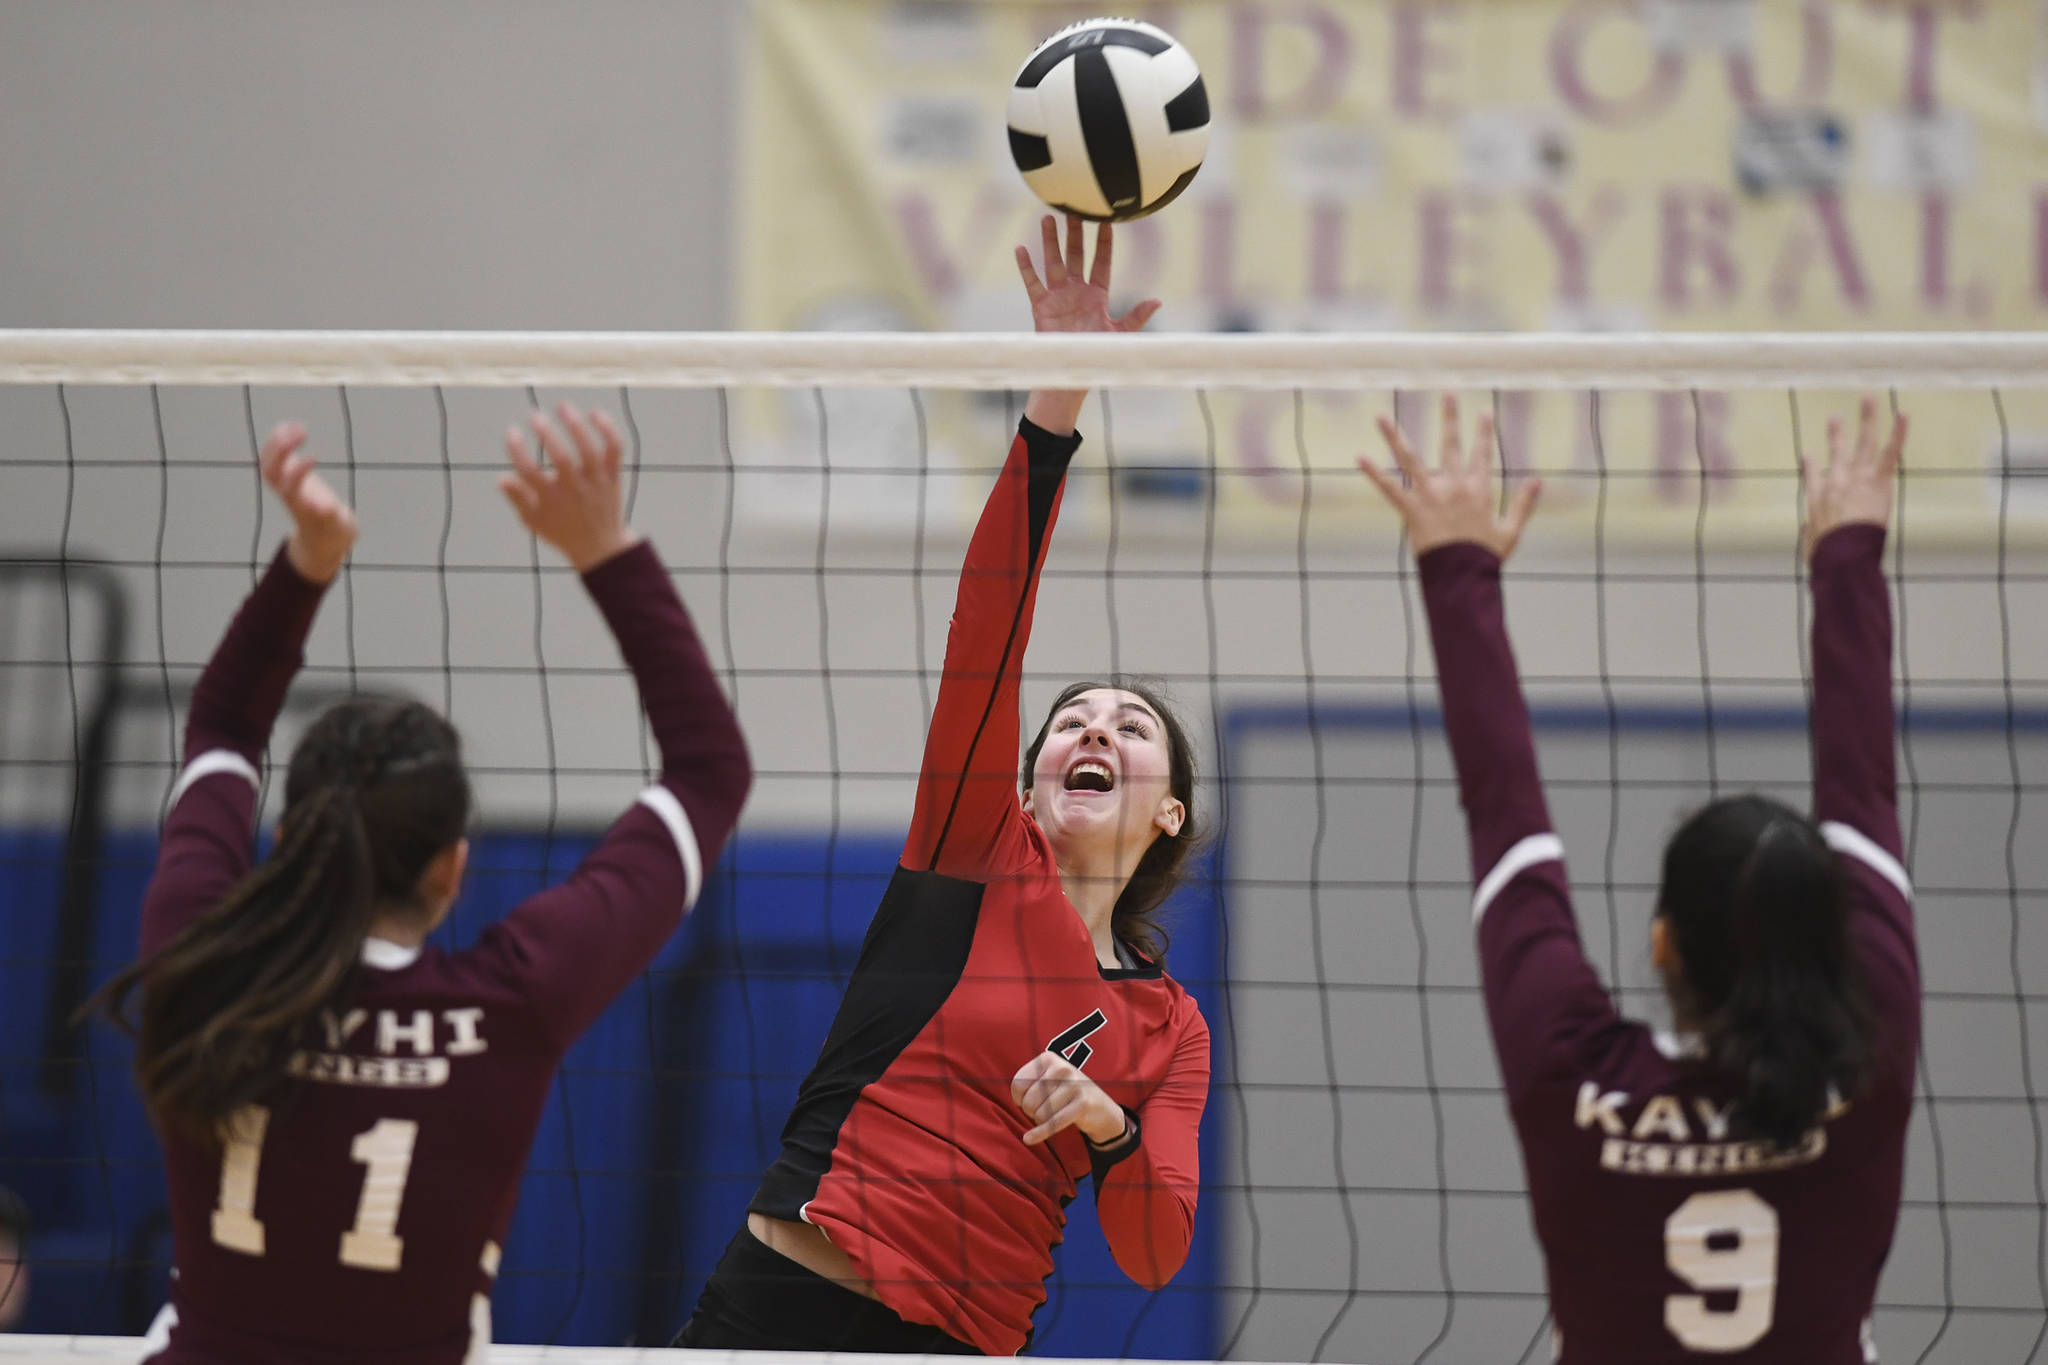 Juneau-Douglas’ Jenae Pusich spikes the ball against Ketchikan’s Lindsey Byron, left, and Maddy Purcell during the Region V Volleyball Tournament at Thunder Mountain High School on Thursday, Nov. 7, 2019. JDHS won 25-8, 25-14, 14-25, 25-15. (Michael Penn | Juneau Empire)